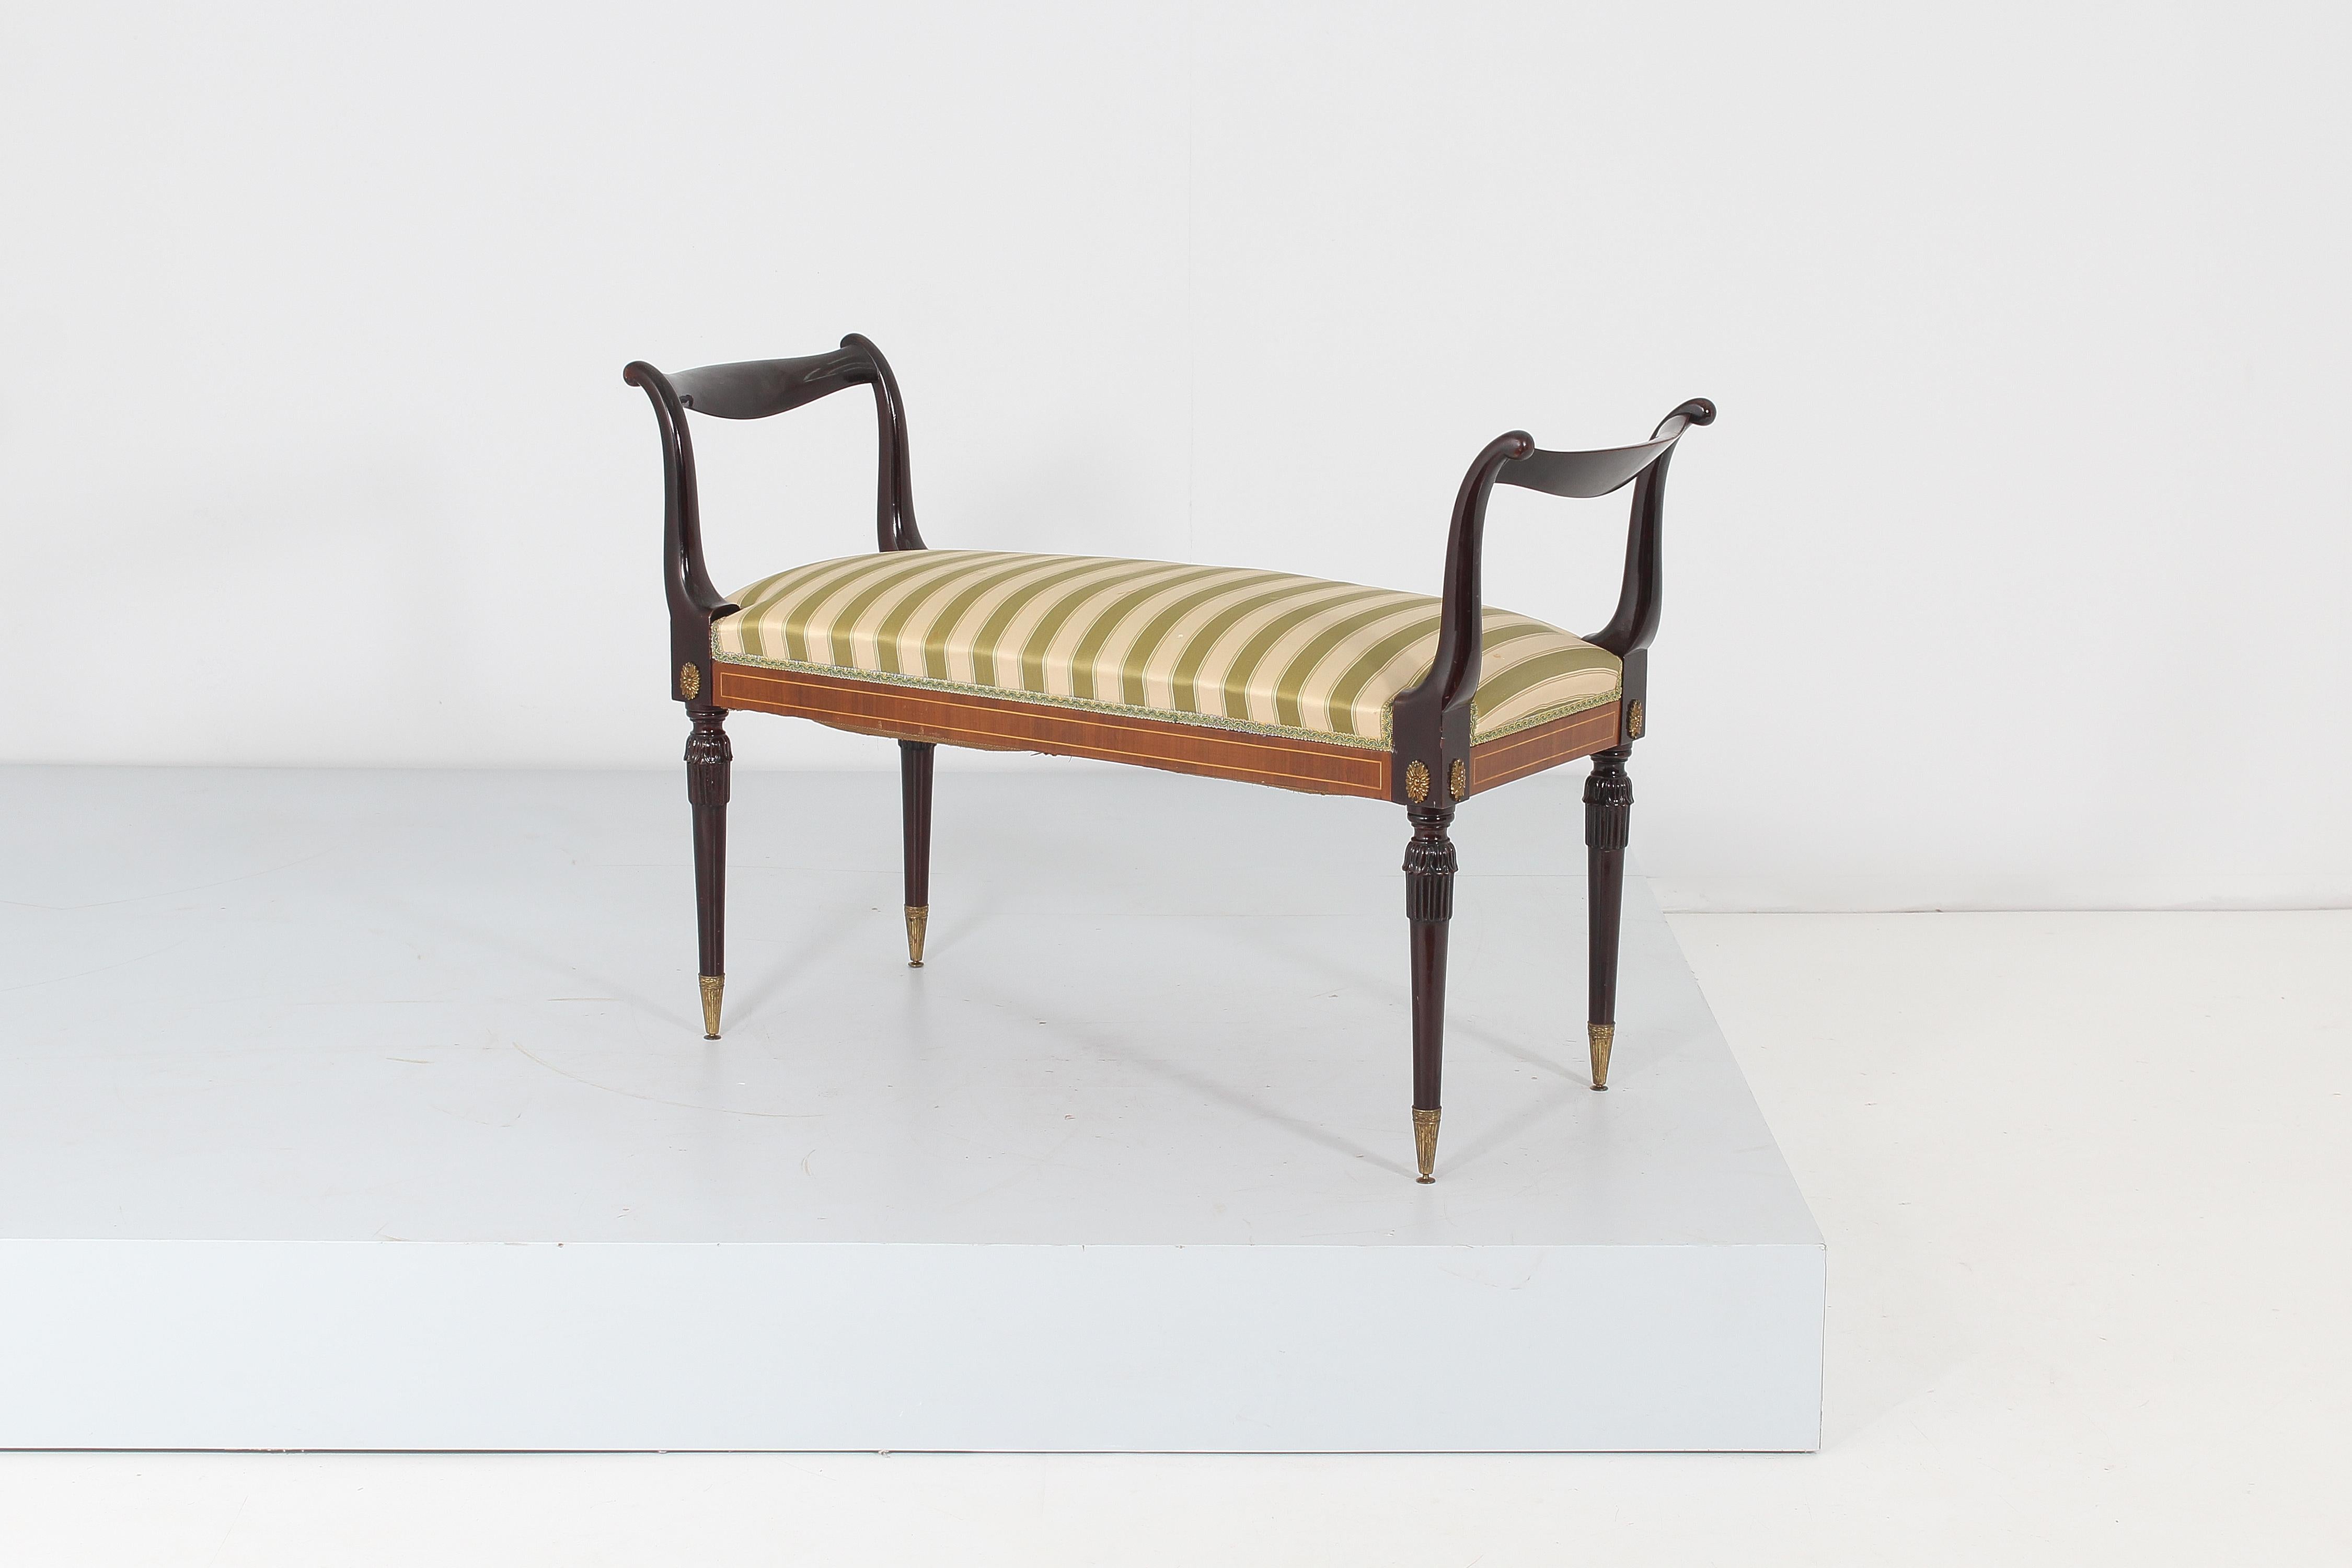 Italian Mid-Century Emilio Lancia Wooden Bench with Striped Fabric , Italy, 1950s For Sale